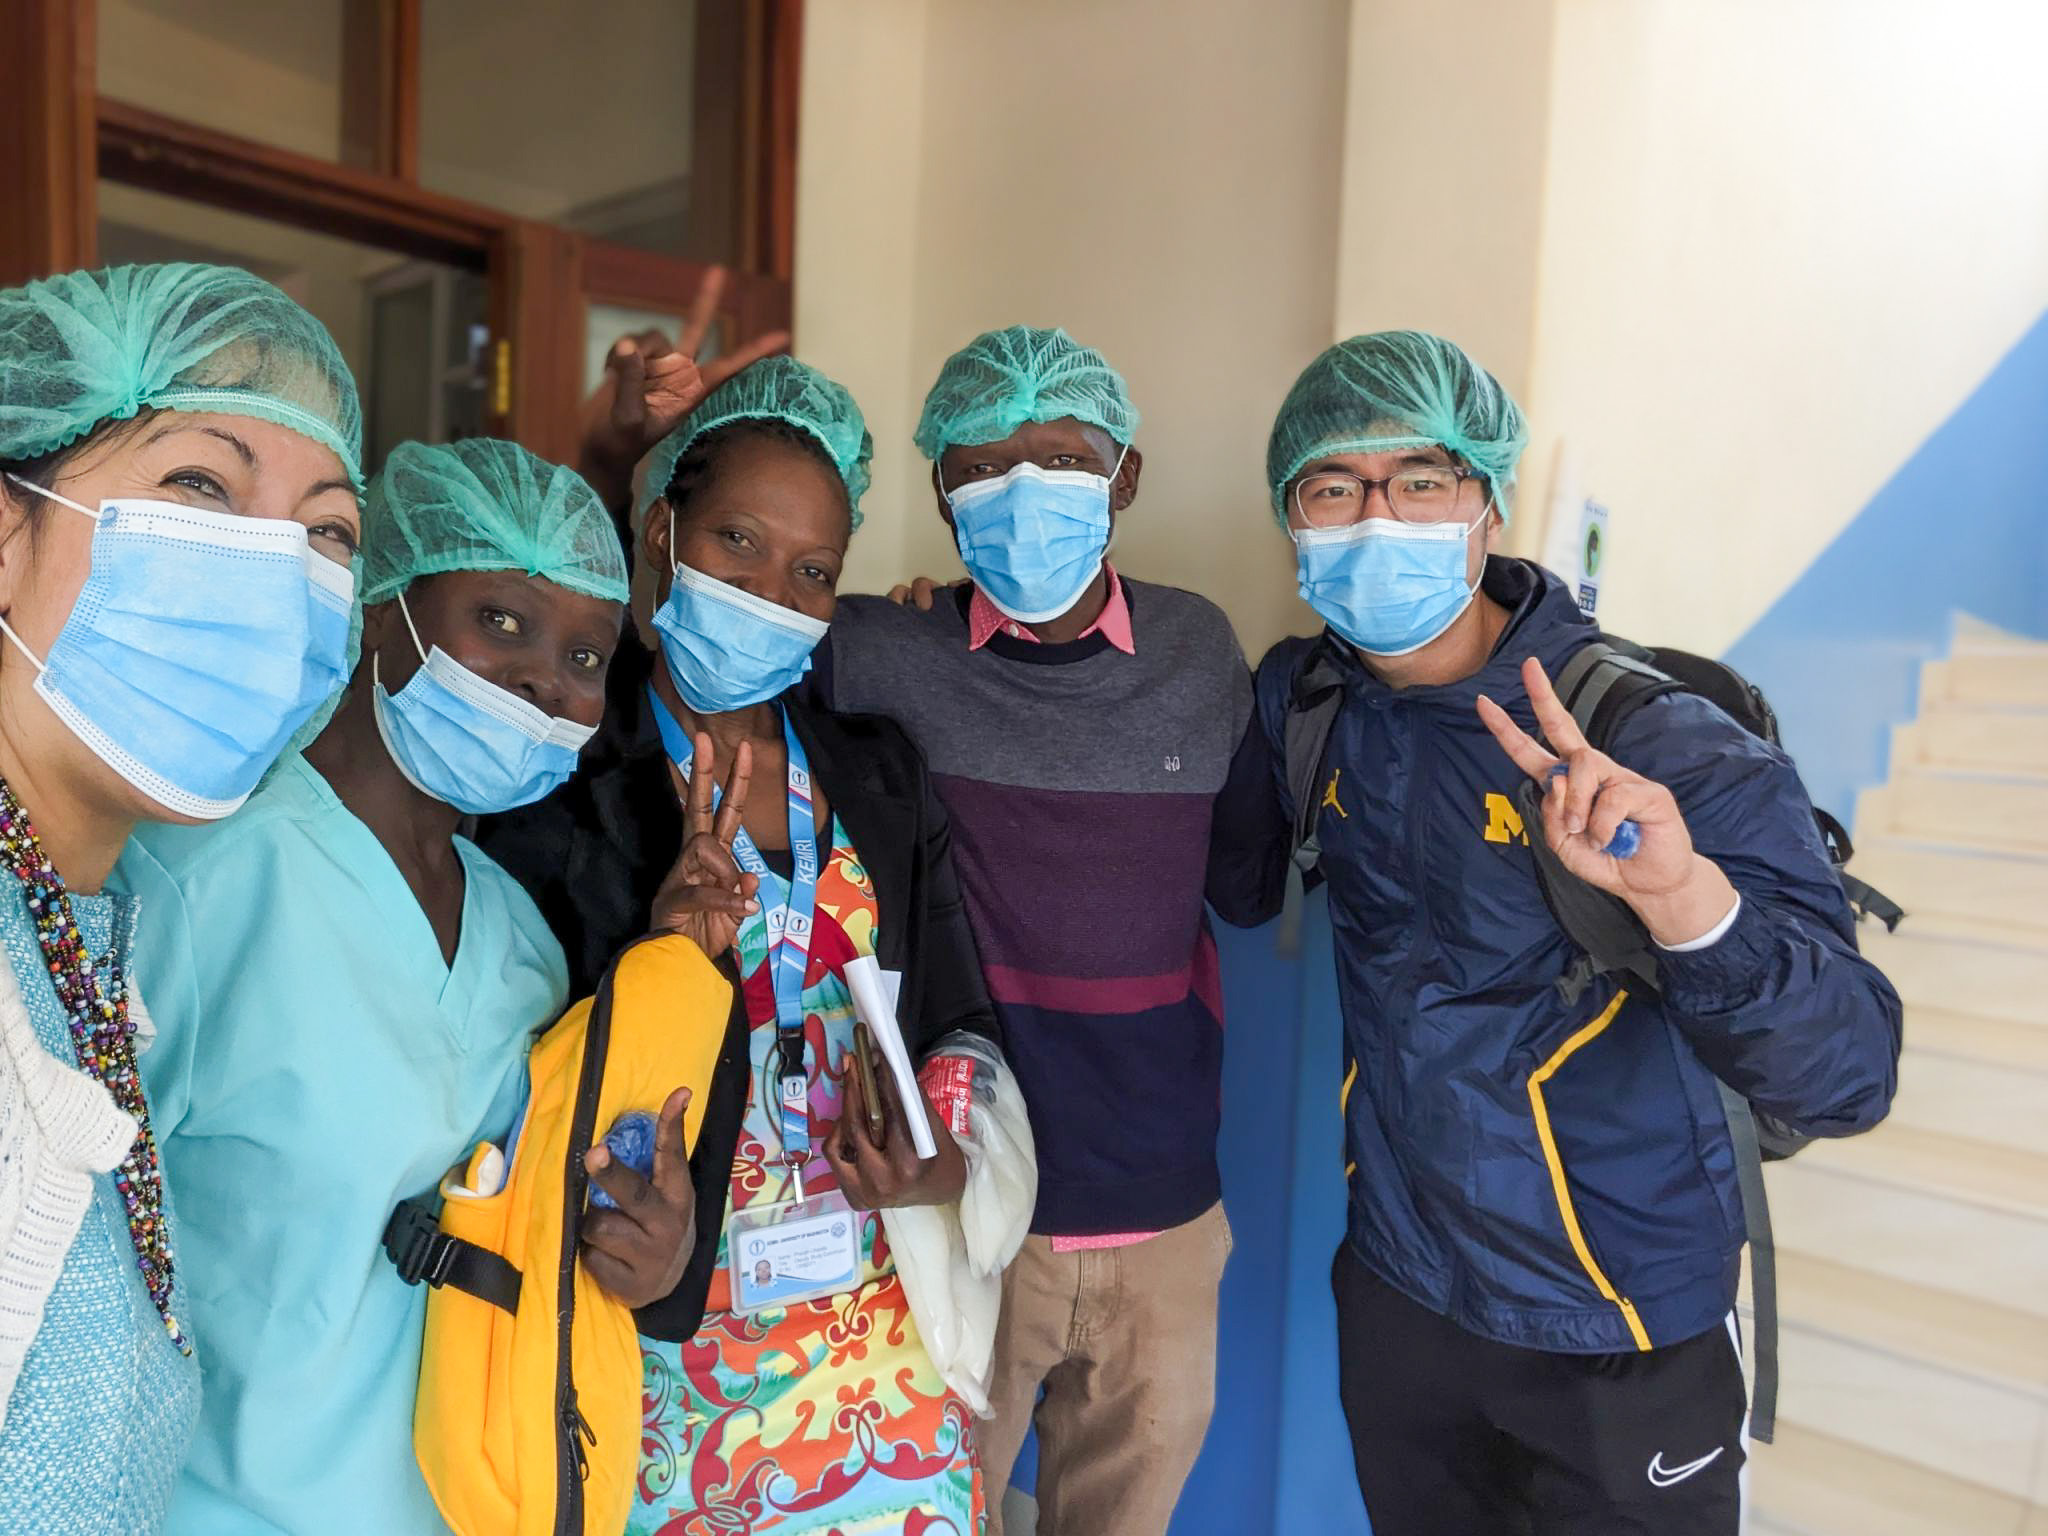 Jooyoung poses with three other people. They are all wearing blue face masks and appear to be hospital staff.